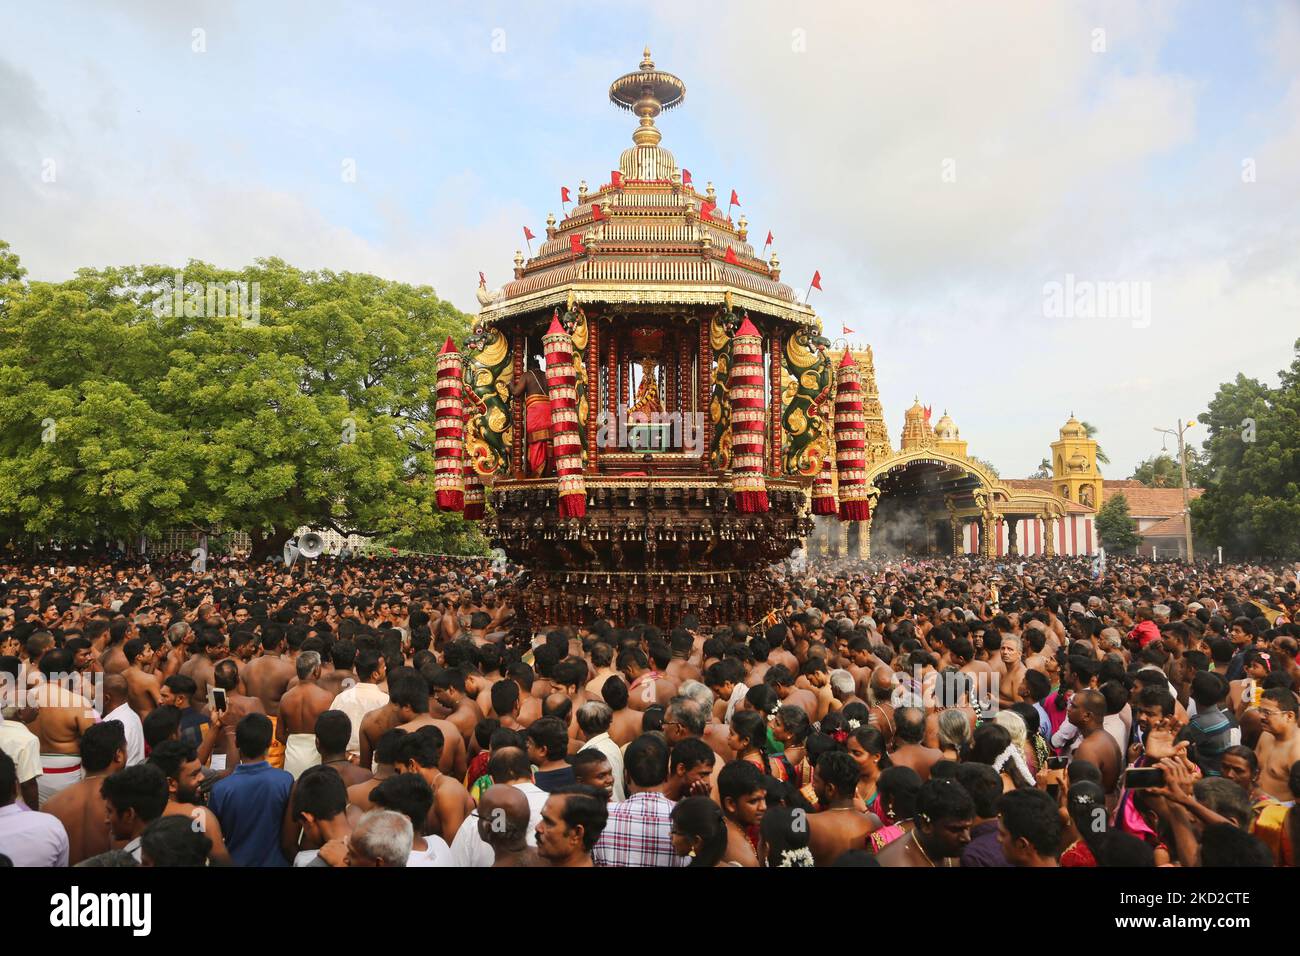 Tamil Hindu devotees escort the large wooden chariot carrying the idol of Lord Murugan during the Ther Festival (Chariot Festival) at the Nallur Kandaswamy Kovil (Nallur Temple) in Jaffna, Sri Lanka, on August 21, 2017. Hundreds of thousands of Tamil Hindu devotees from across the globe attended this festival. (Photo by Creative Touch Imaging Ltd./NurPhoto) Stock Photo